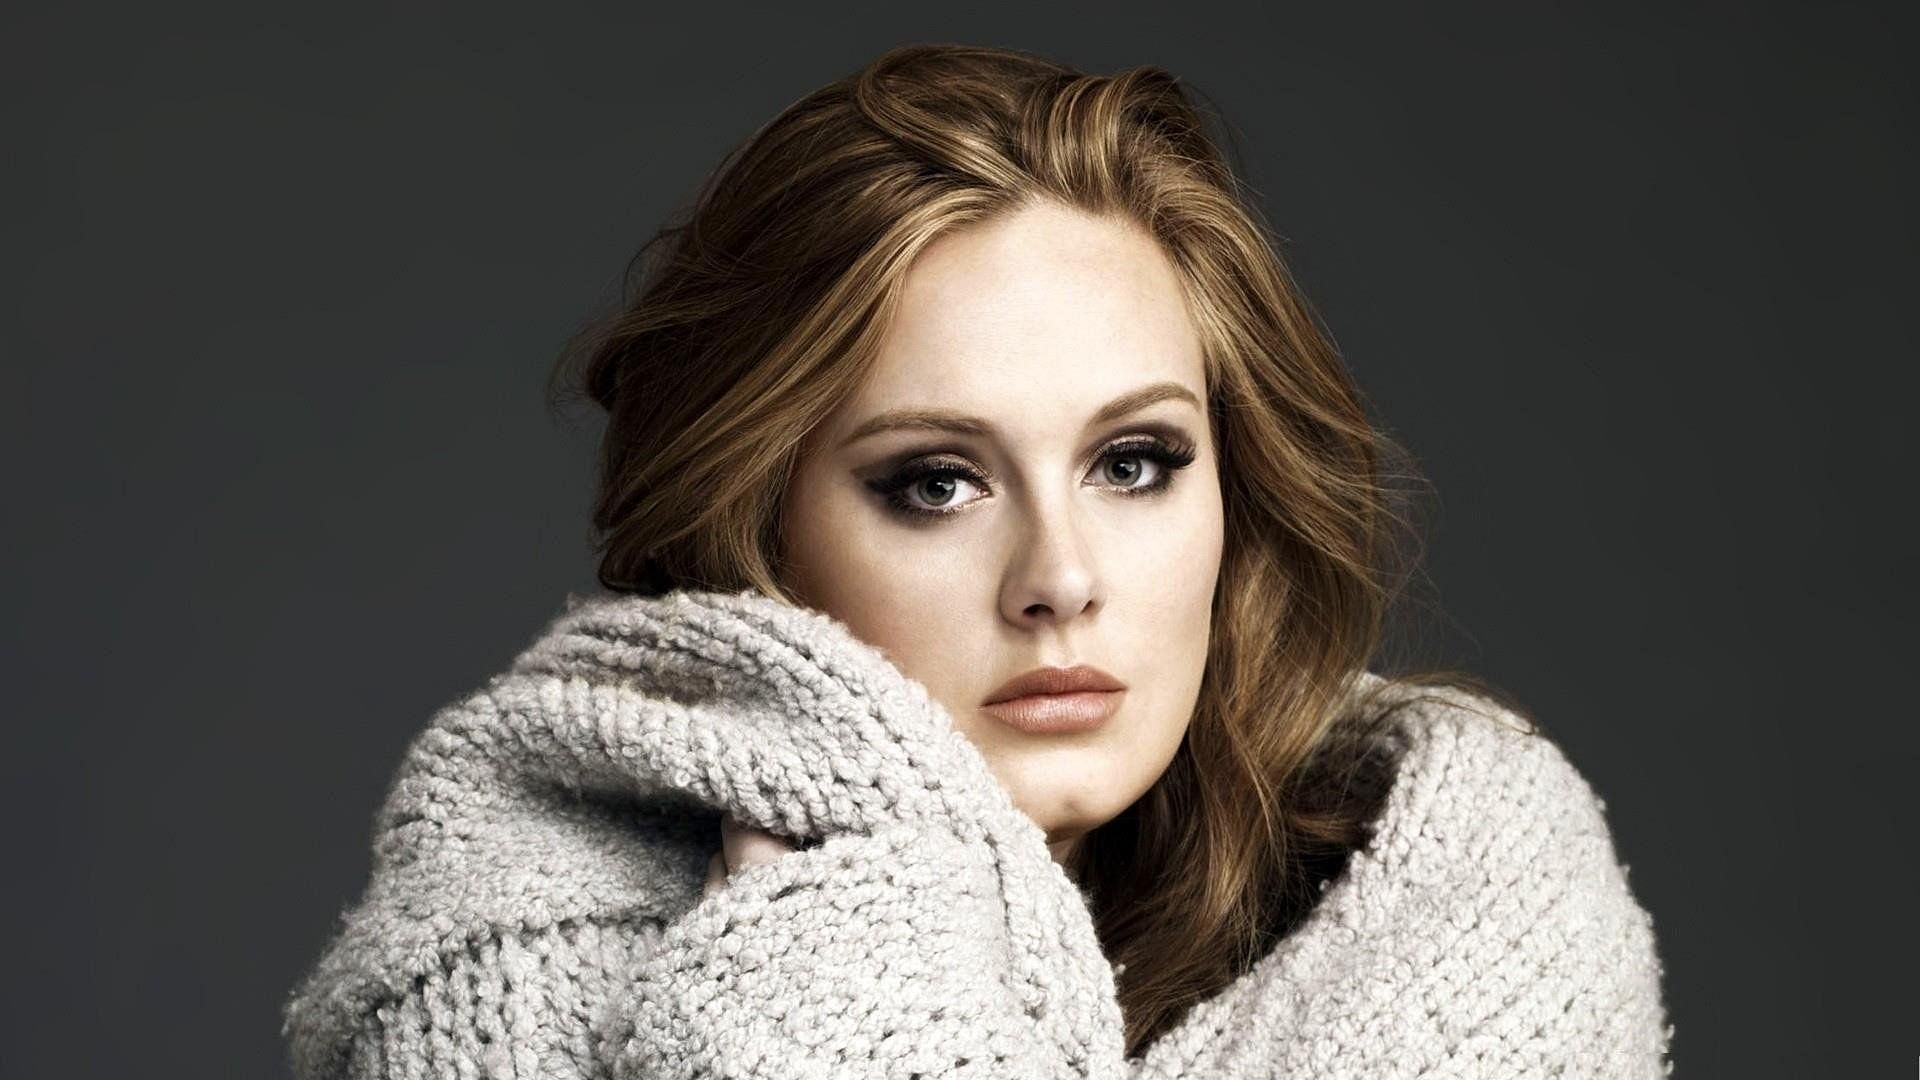 Adele has rescheduled her Las Vegas Residency due to production delays amid a COVID-19 breakout (Image via Getty Images)